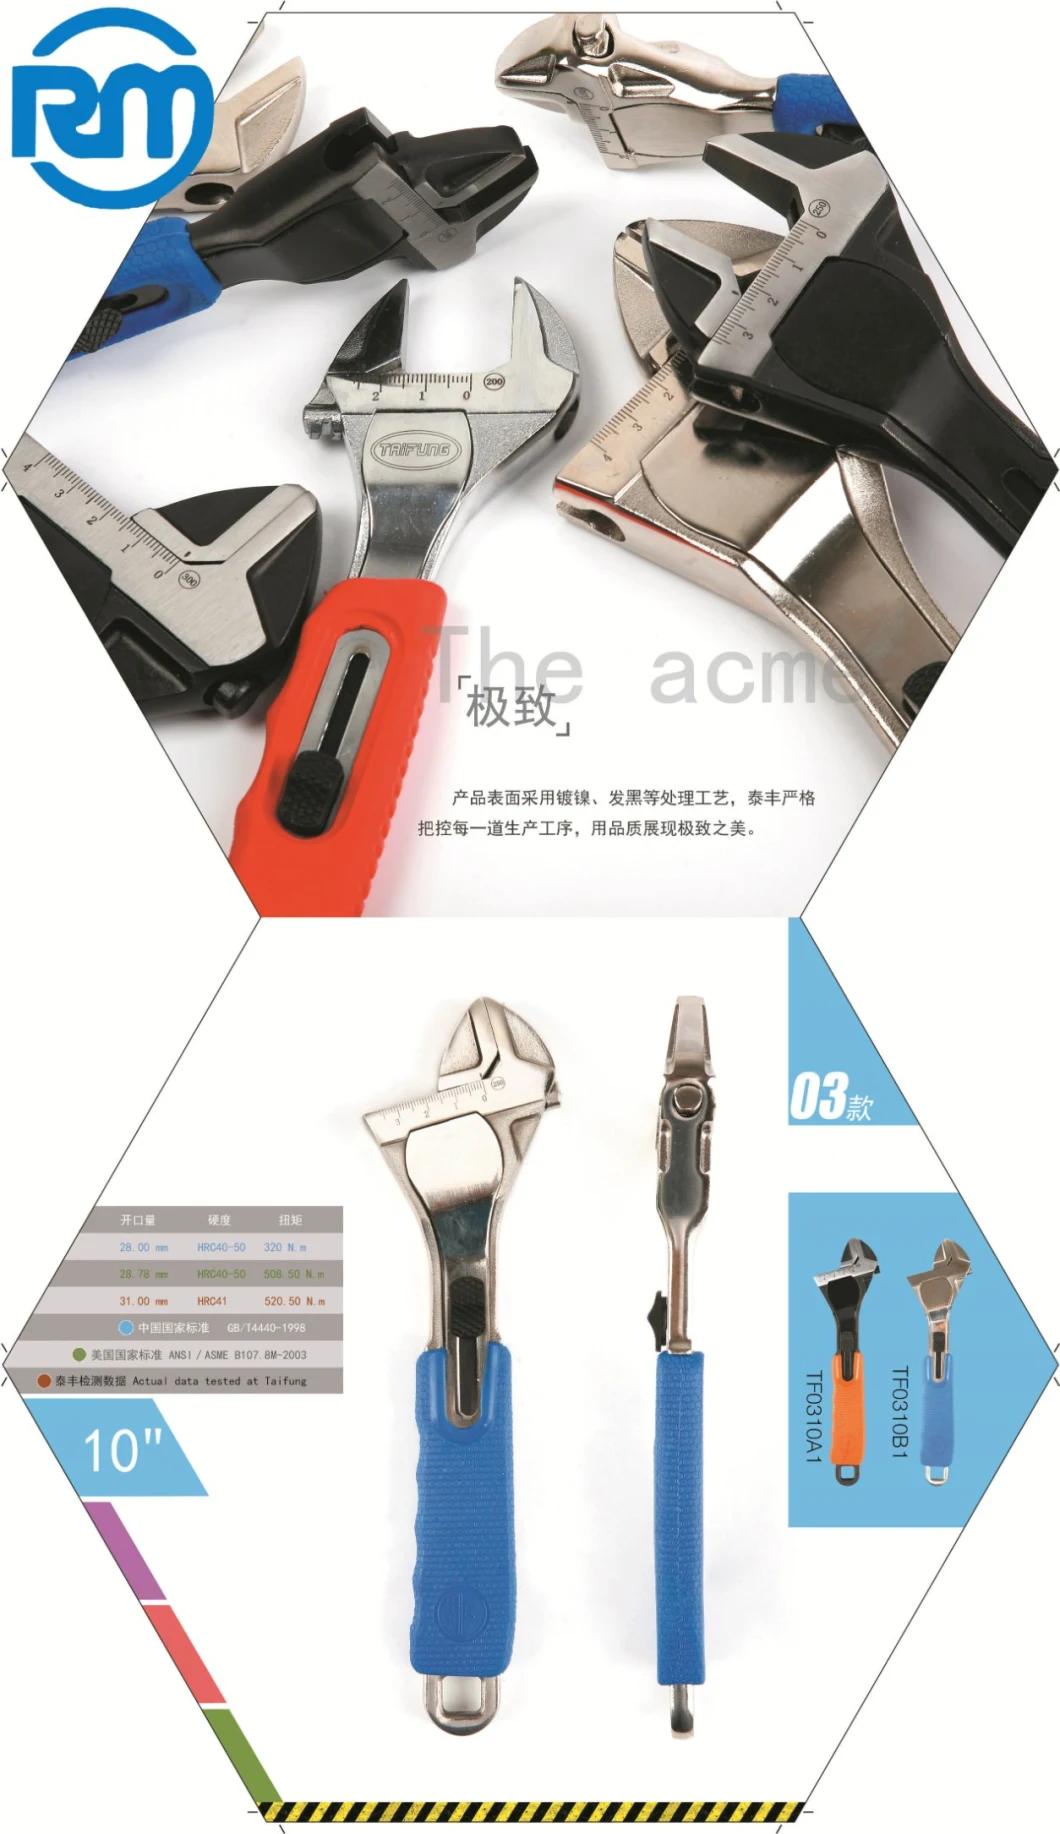 Super Multi Function Double Ended Ratchet Gear Combination 48 Adjustable Wrench Spanner Set Tools Kits